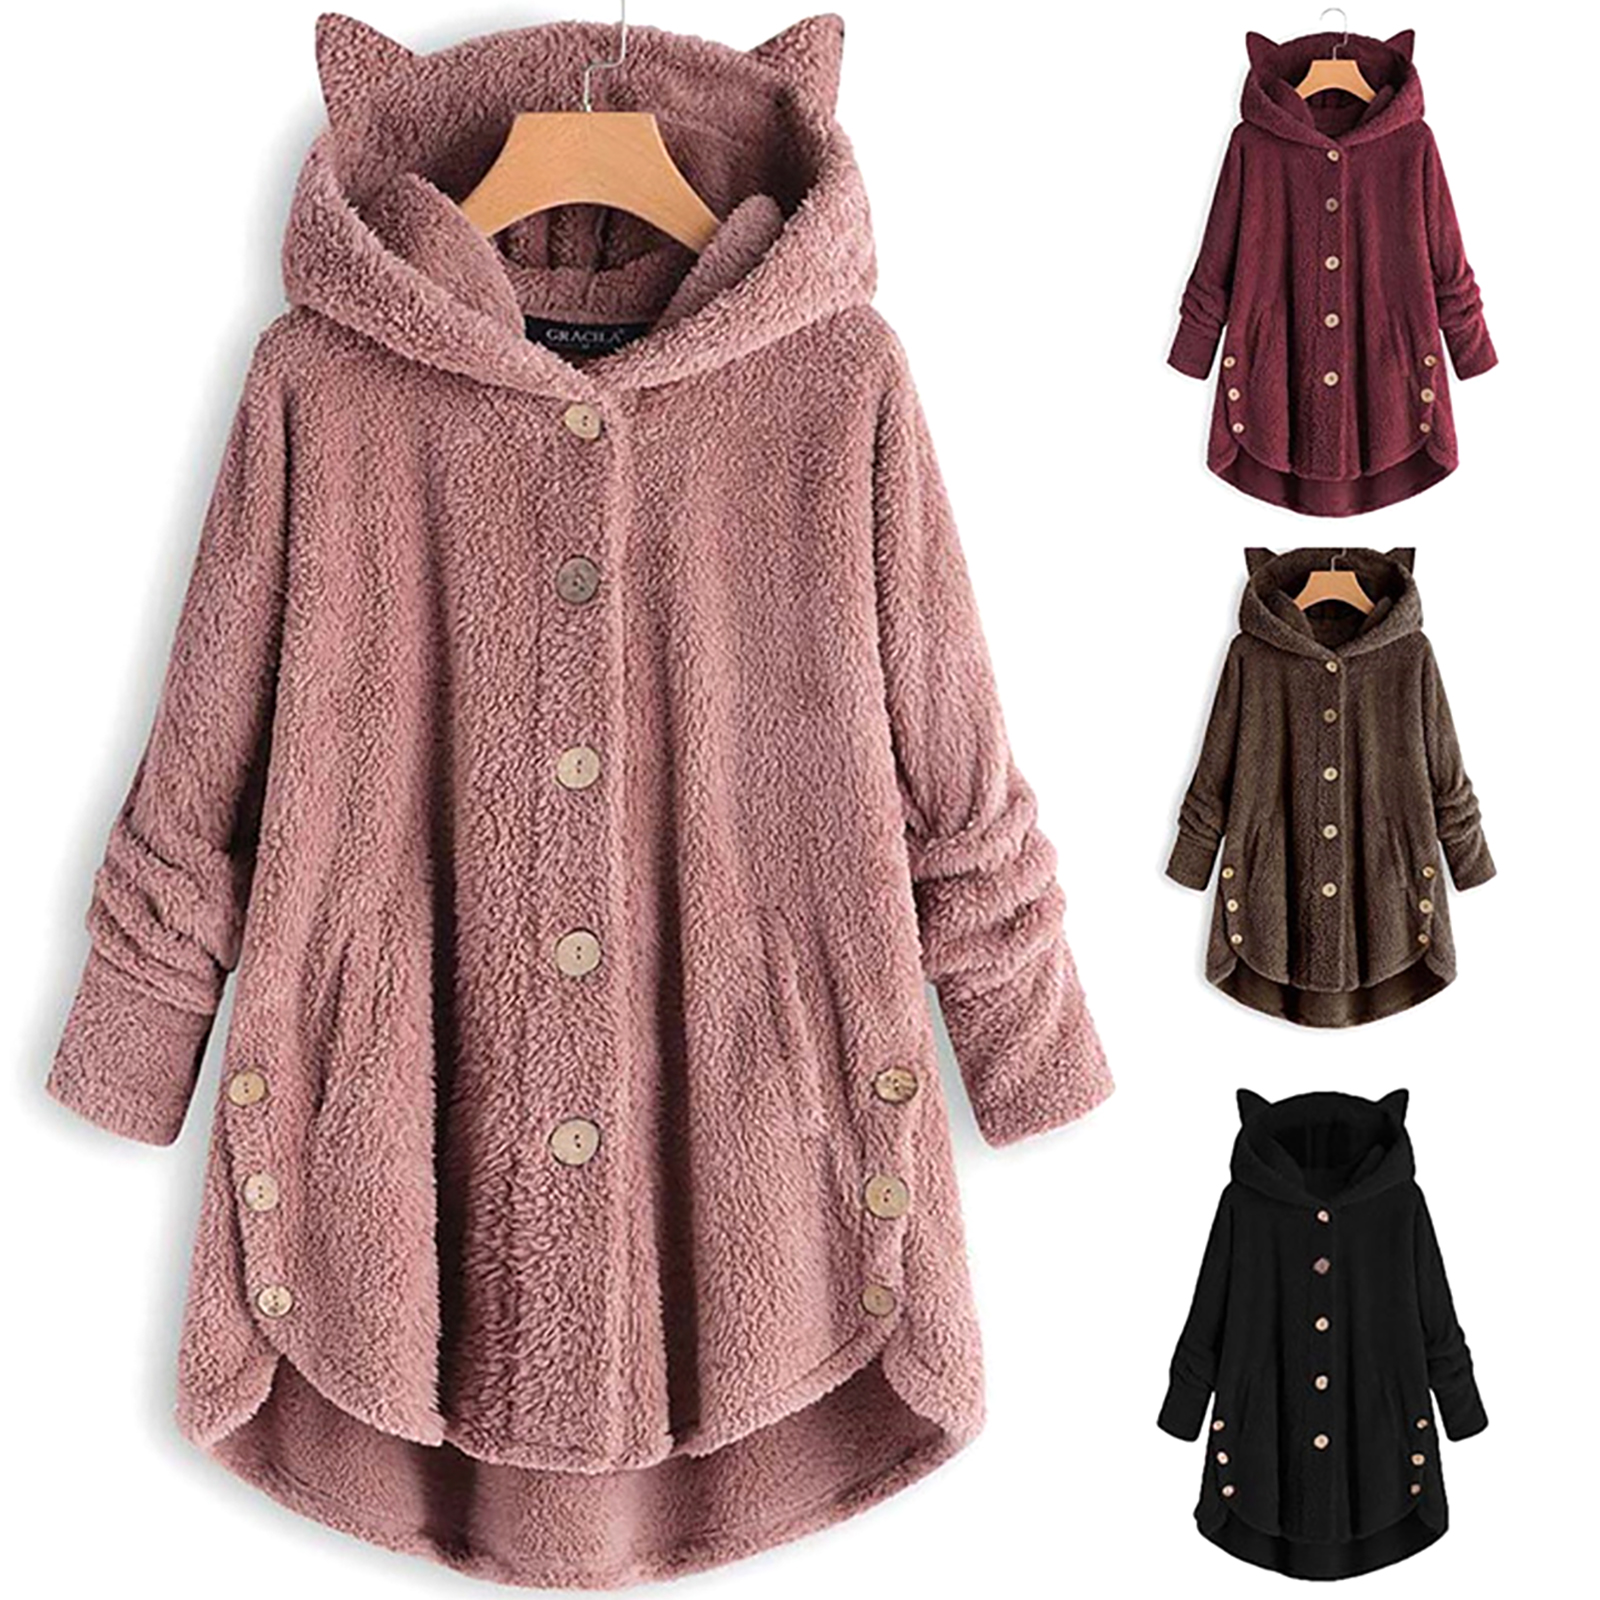 Women's Fashion Long Sleeve Button Faux Shearling Shaggy Oversized Coat Jacket with Pockets Warm Winter - image 3 of 3